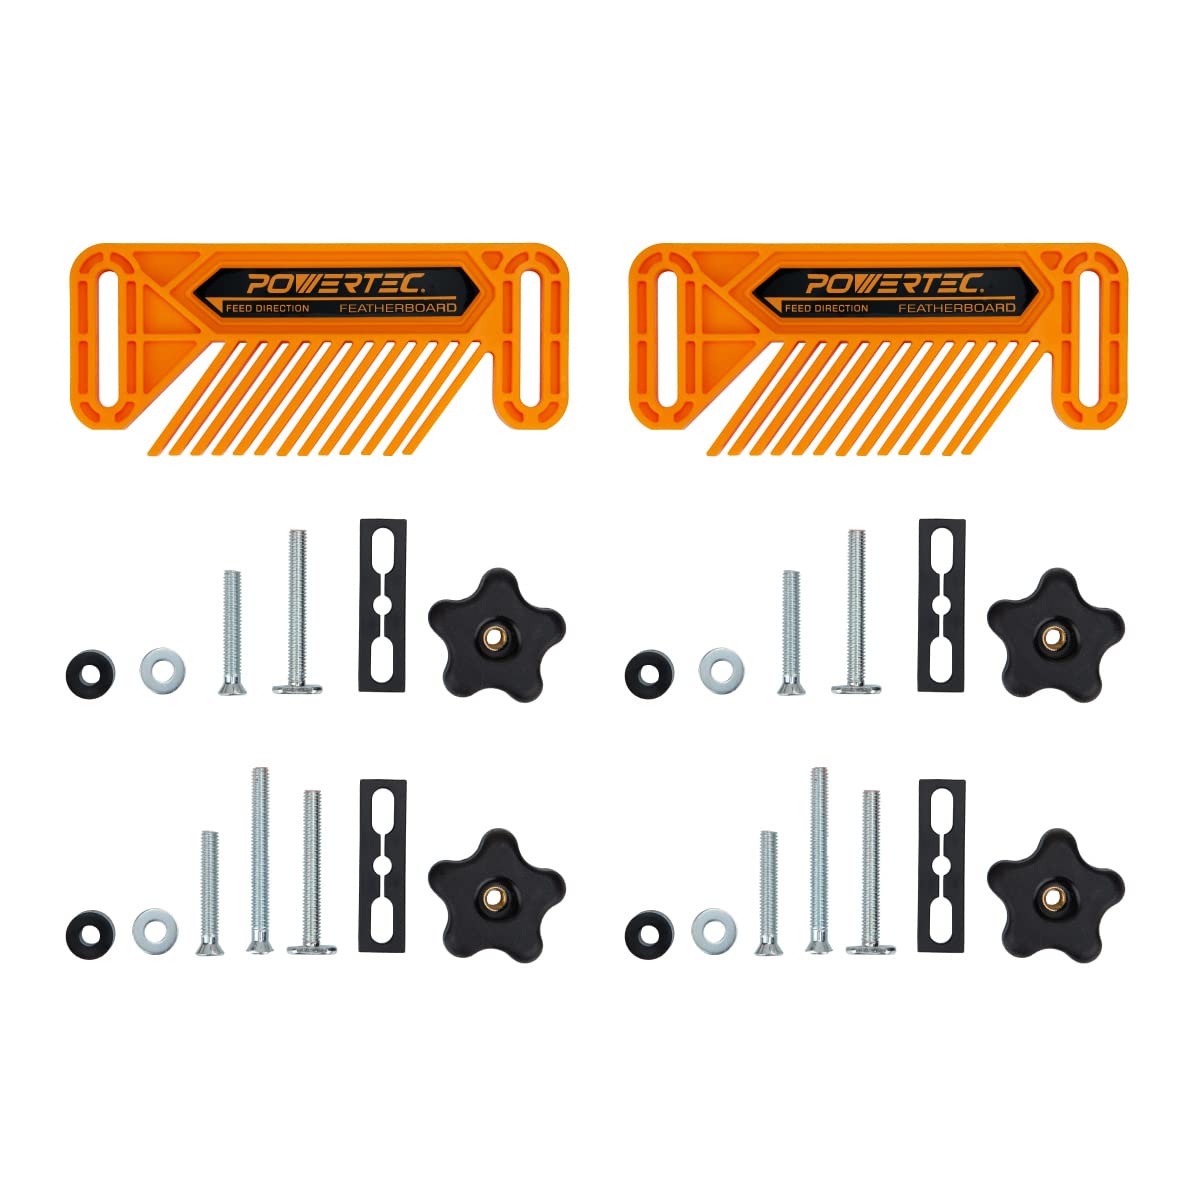 POWERTEC 71553 Router Fence/Router Table Featherboard – 2 Pack